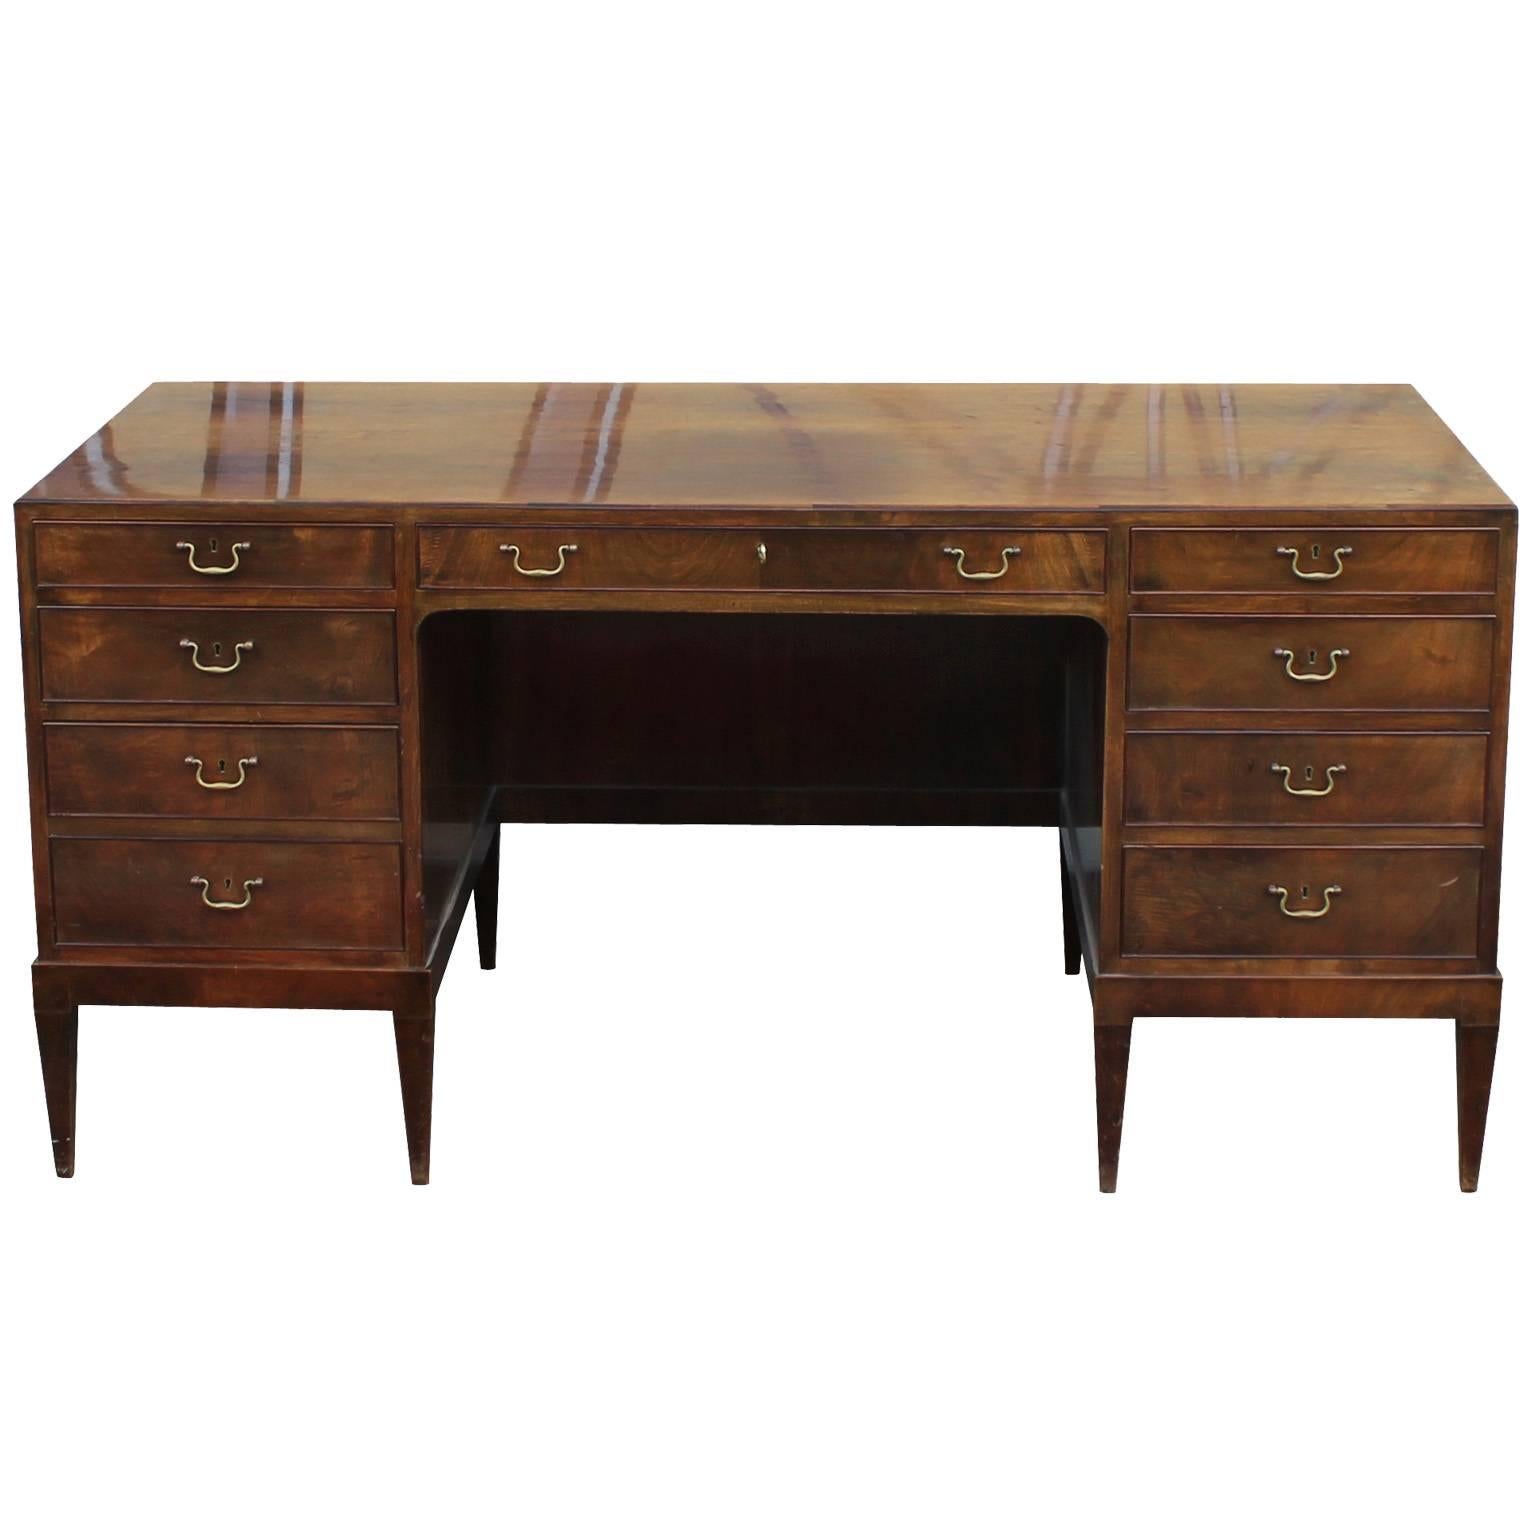 Stunning Frits Henningsen executive desk in mahogany with brass hardware. Desk is topped with a long single drawer and flanked with four graduated drawers on either side. Raised on square tapered legs. Original finish, The top has some sun faded